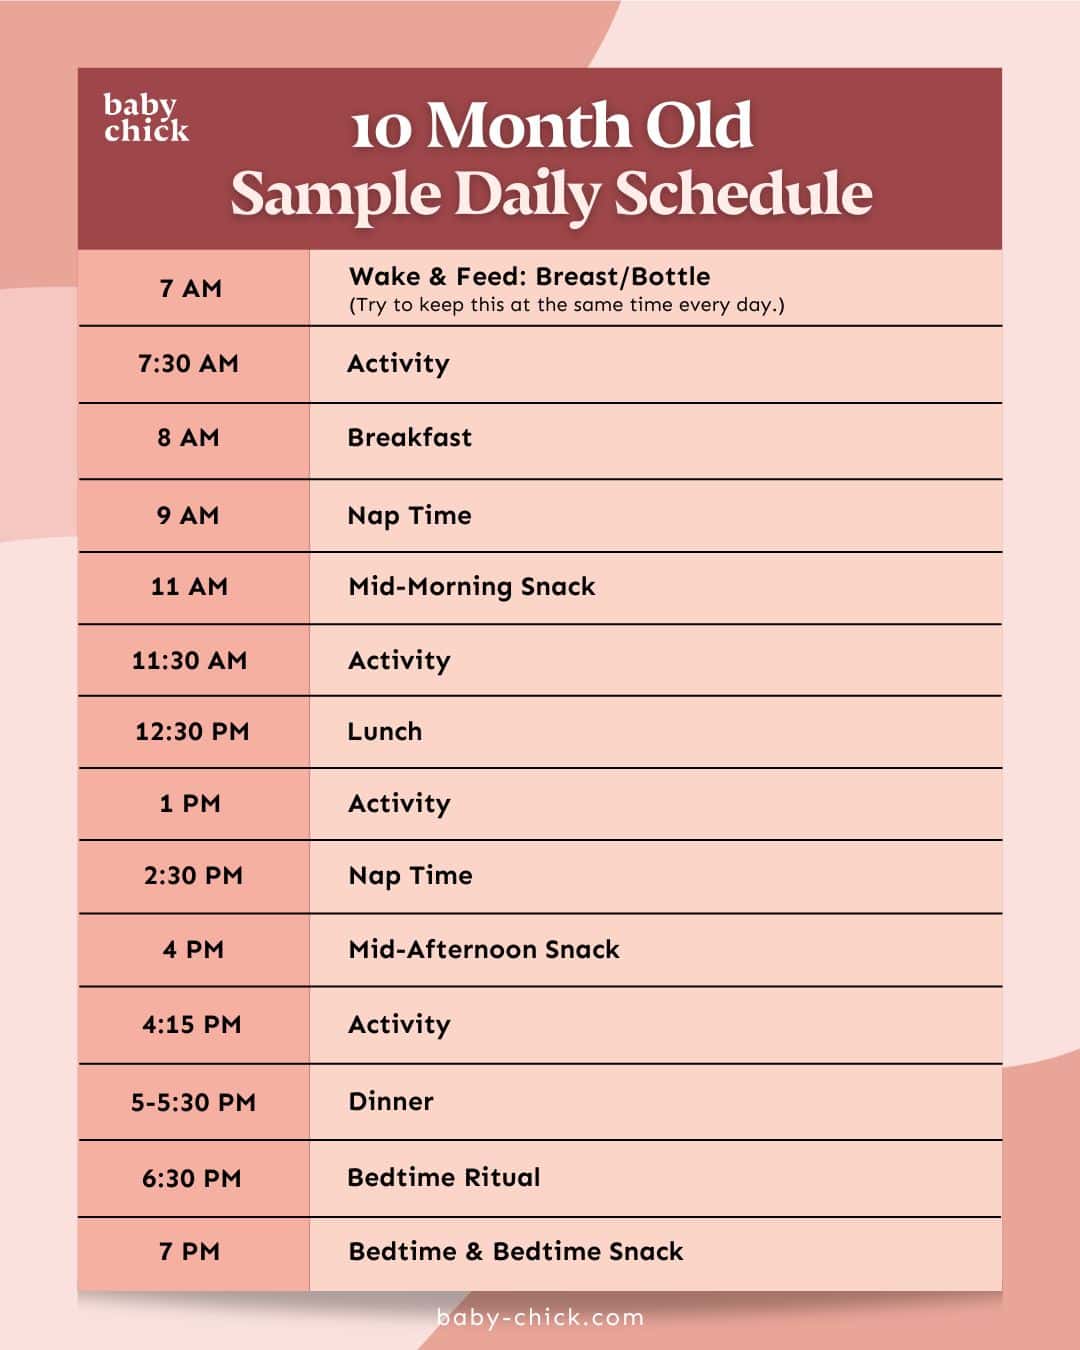 10 month old sample daily schedule